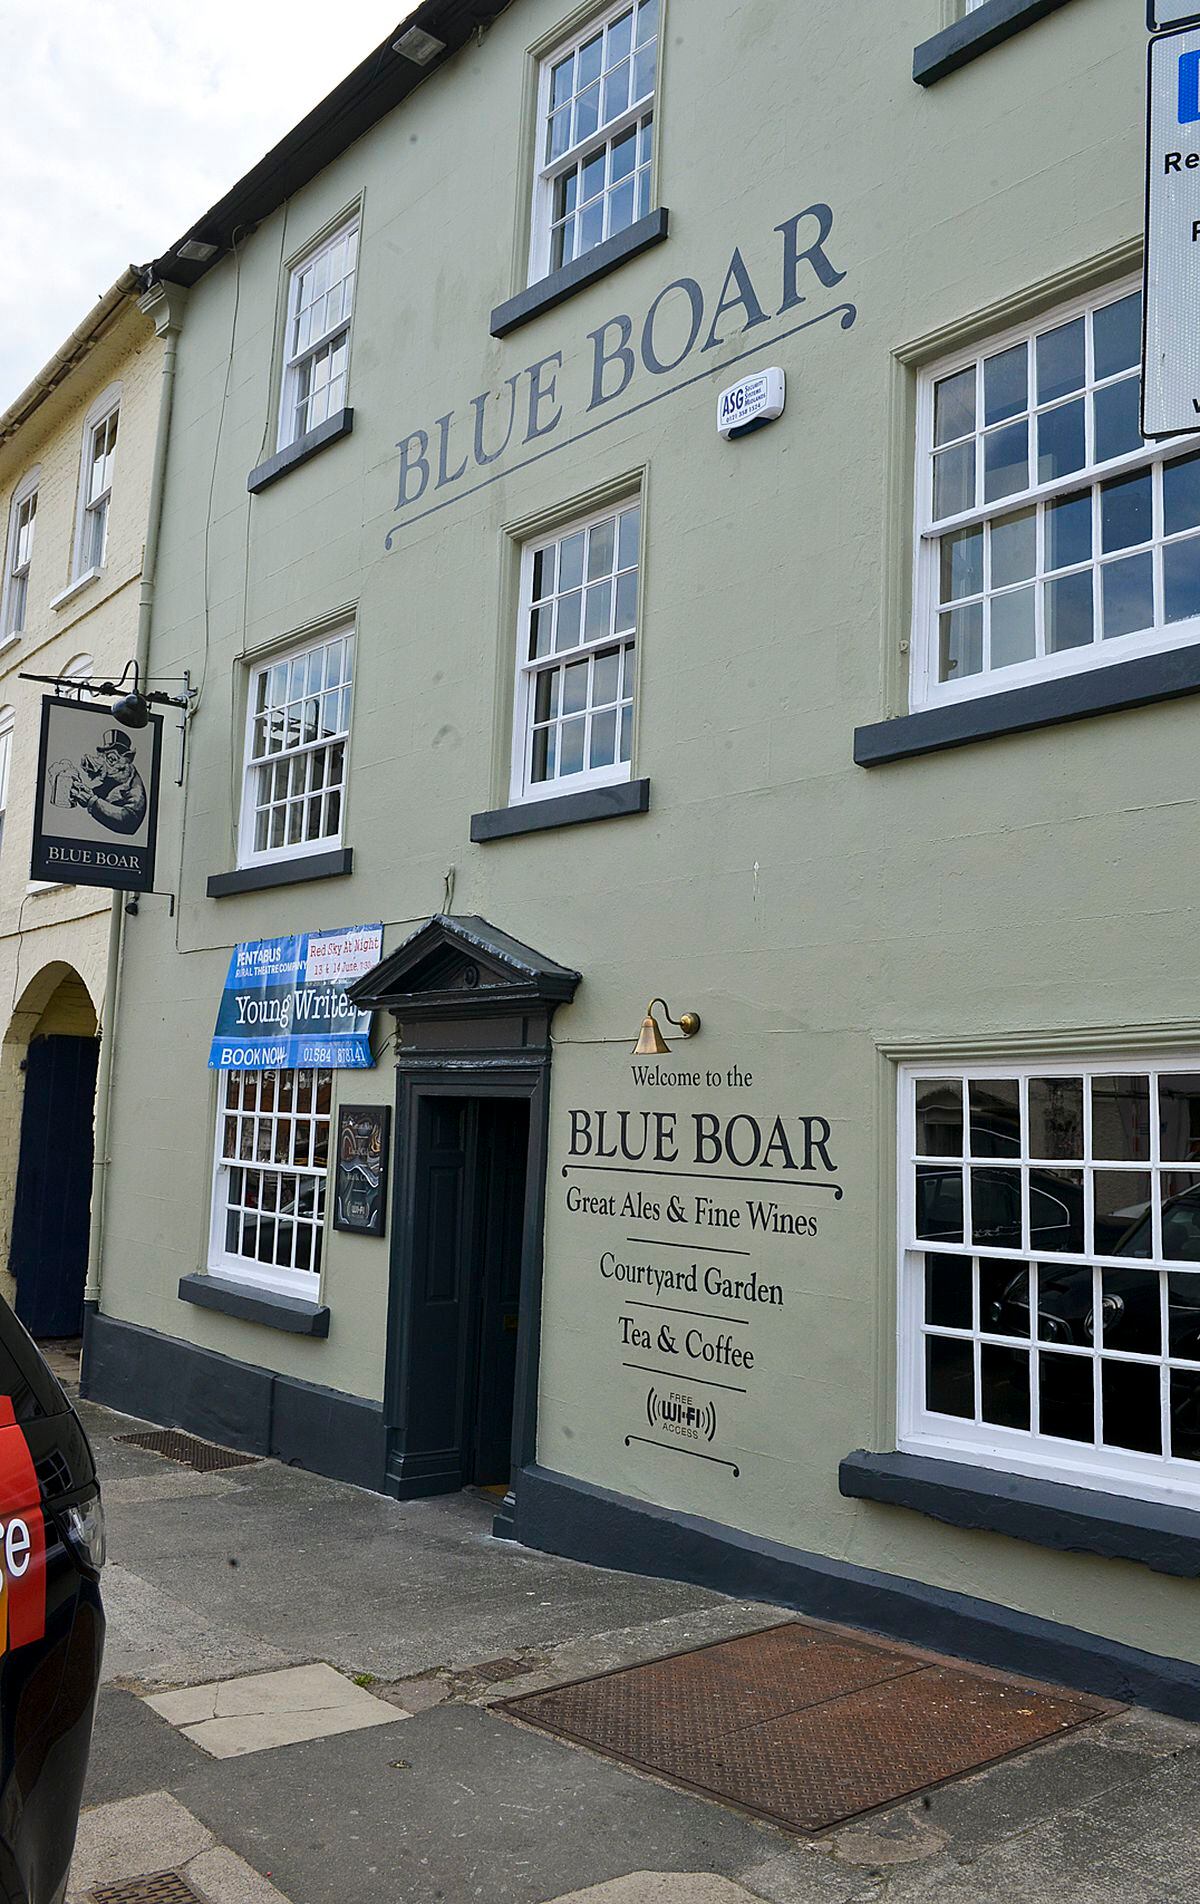 The Blue Boar at Ludlow